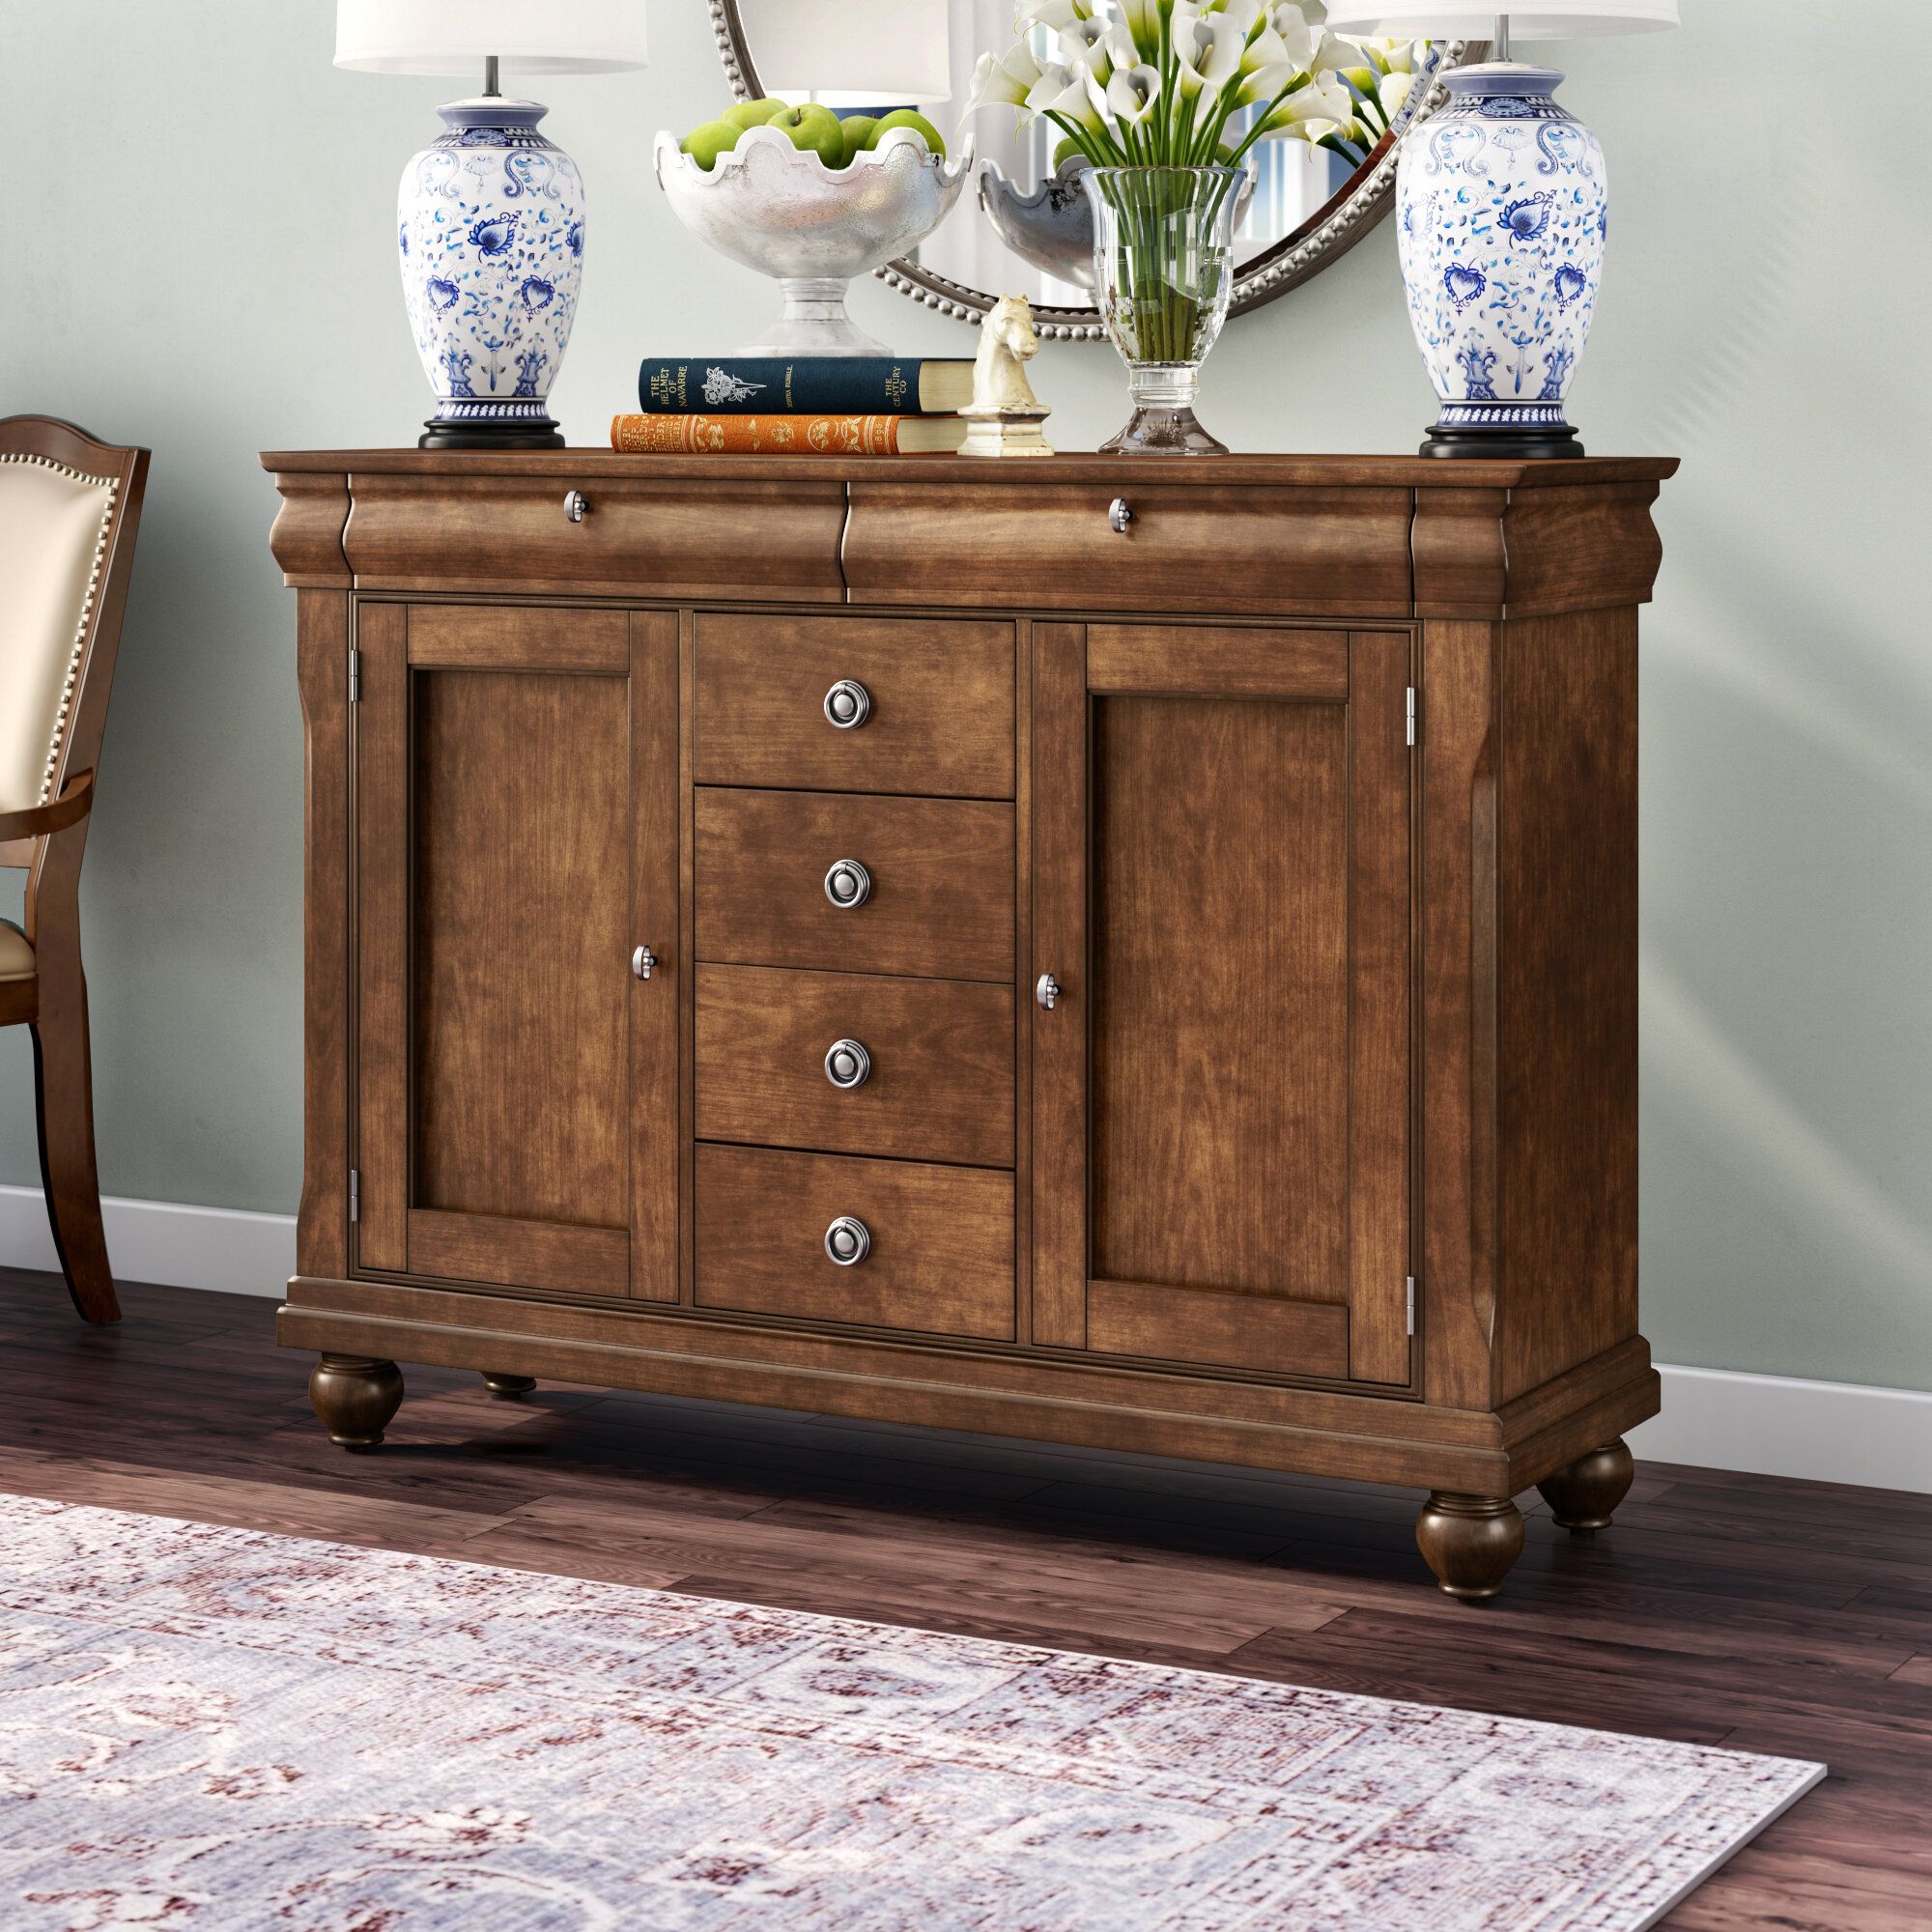 Oreana Sideboard Within Best And Newest Lanesboro Sideboards (View 17 of 20)